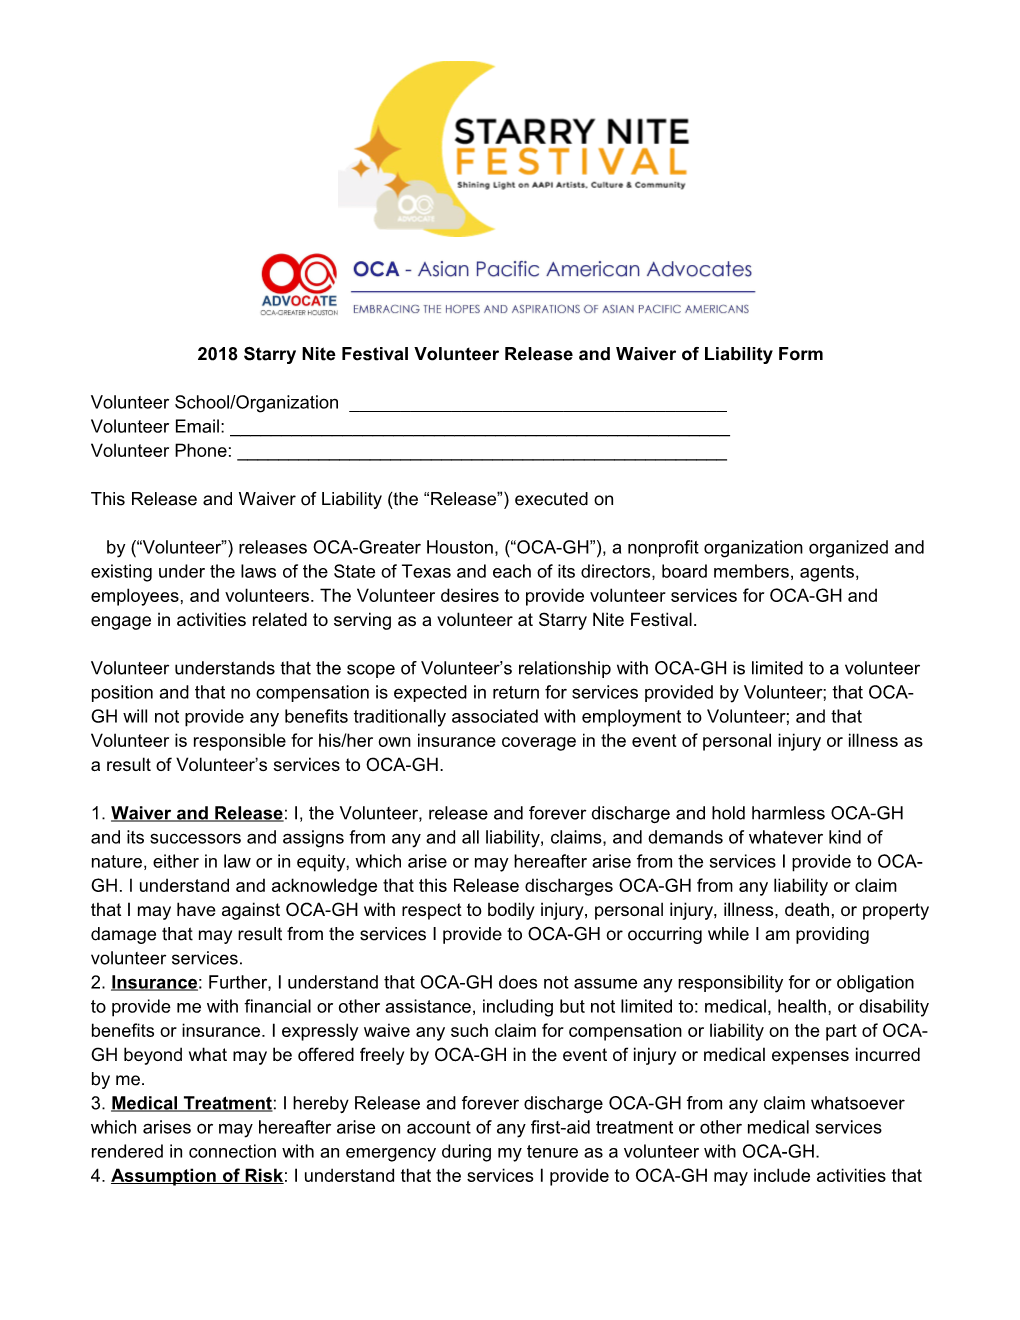 2018 Starry Nite Festival Volunteer Release and Waiver of Liability Form